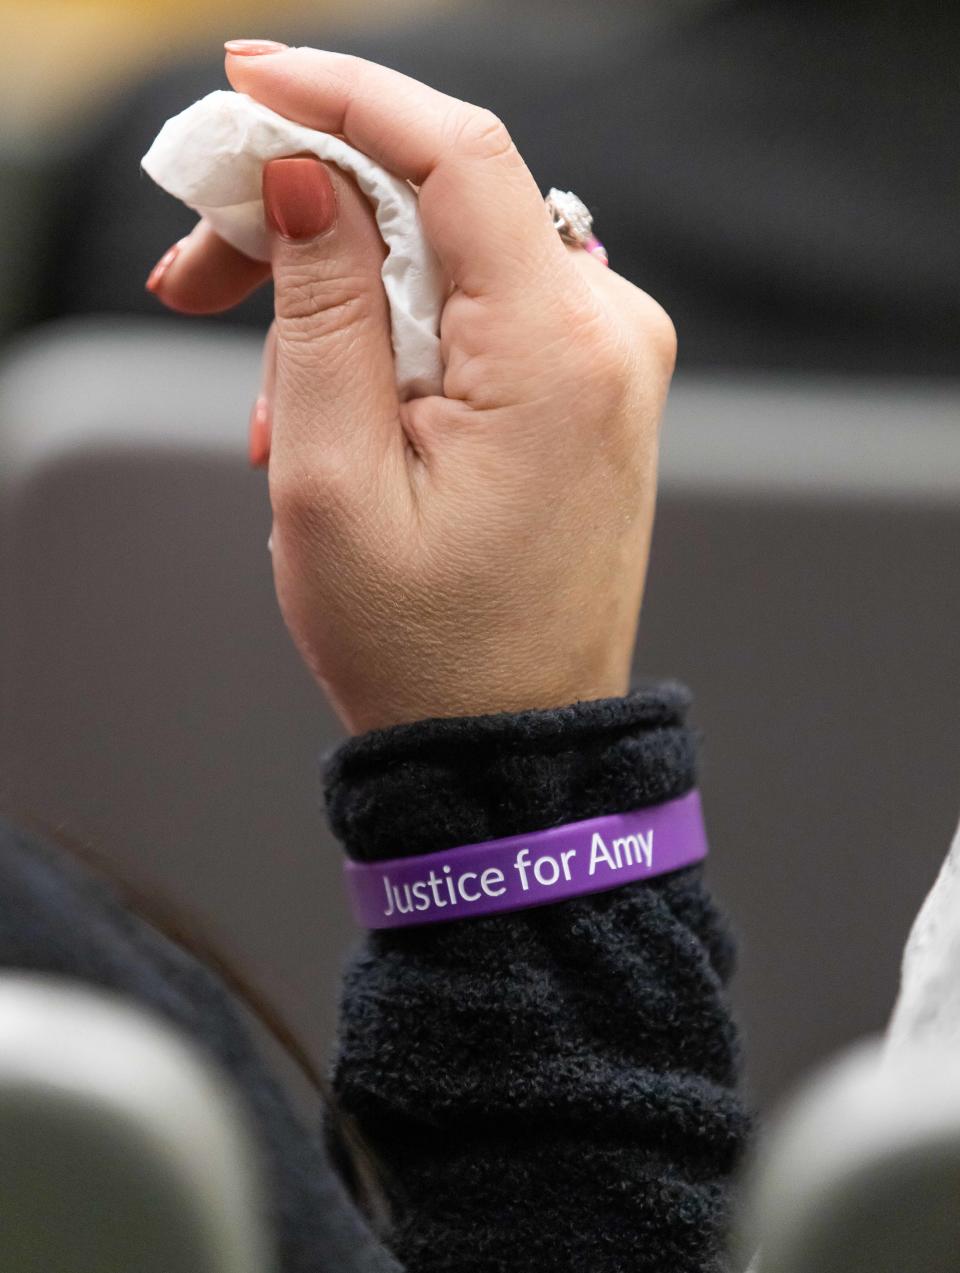 A family member of Amy Scott wears a bracelet in her honor during the Christopher Alan Smith trial Wednesday October 11, 2023. Smith is charged with second degree murder and aggravated battery with a deadly weapon. He's accused of killing Amy Scott. The trial was being held in Judge Peter Bringham’s courtroom at the Marion County Judicial Center in Ocala, Fla. [Doug Engle/Ocala Star Banner]2023